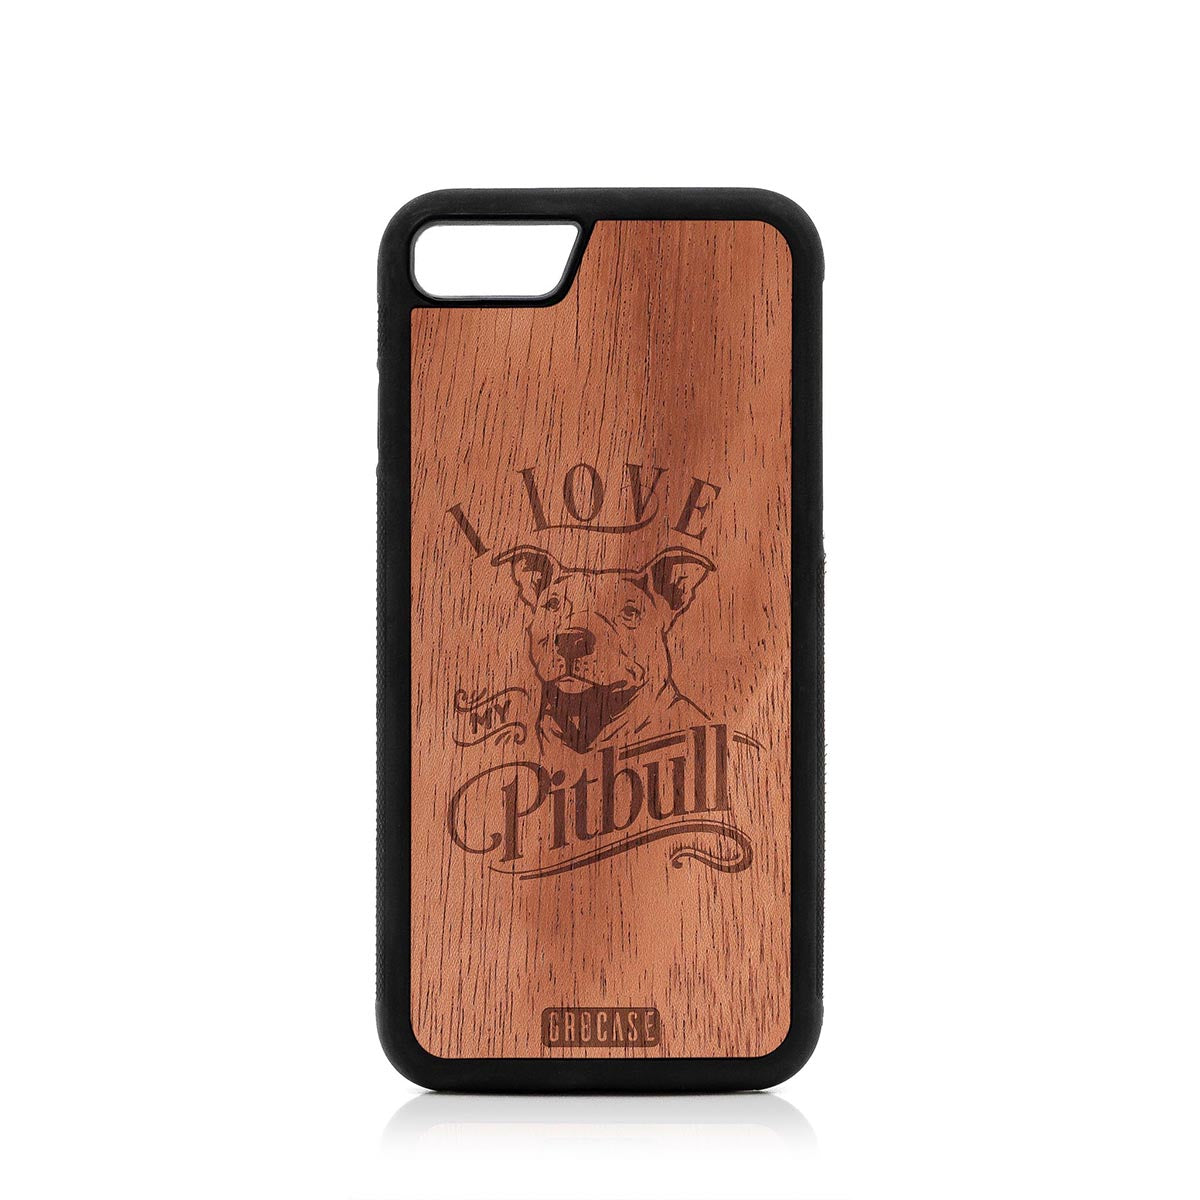 I Love My Pitbull Design Wood Case For iPhone 7/8 by GR8CASE